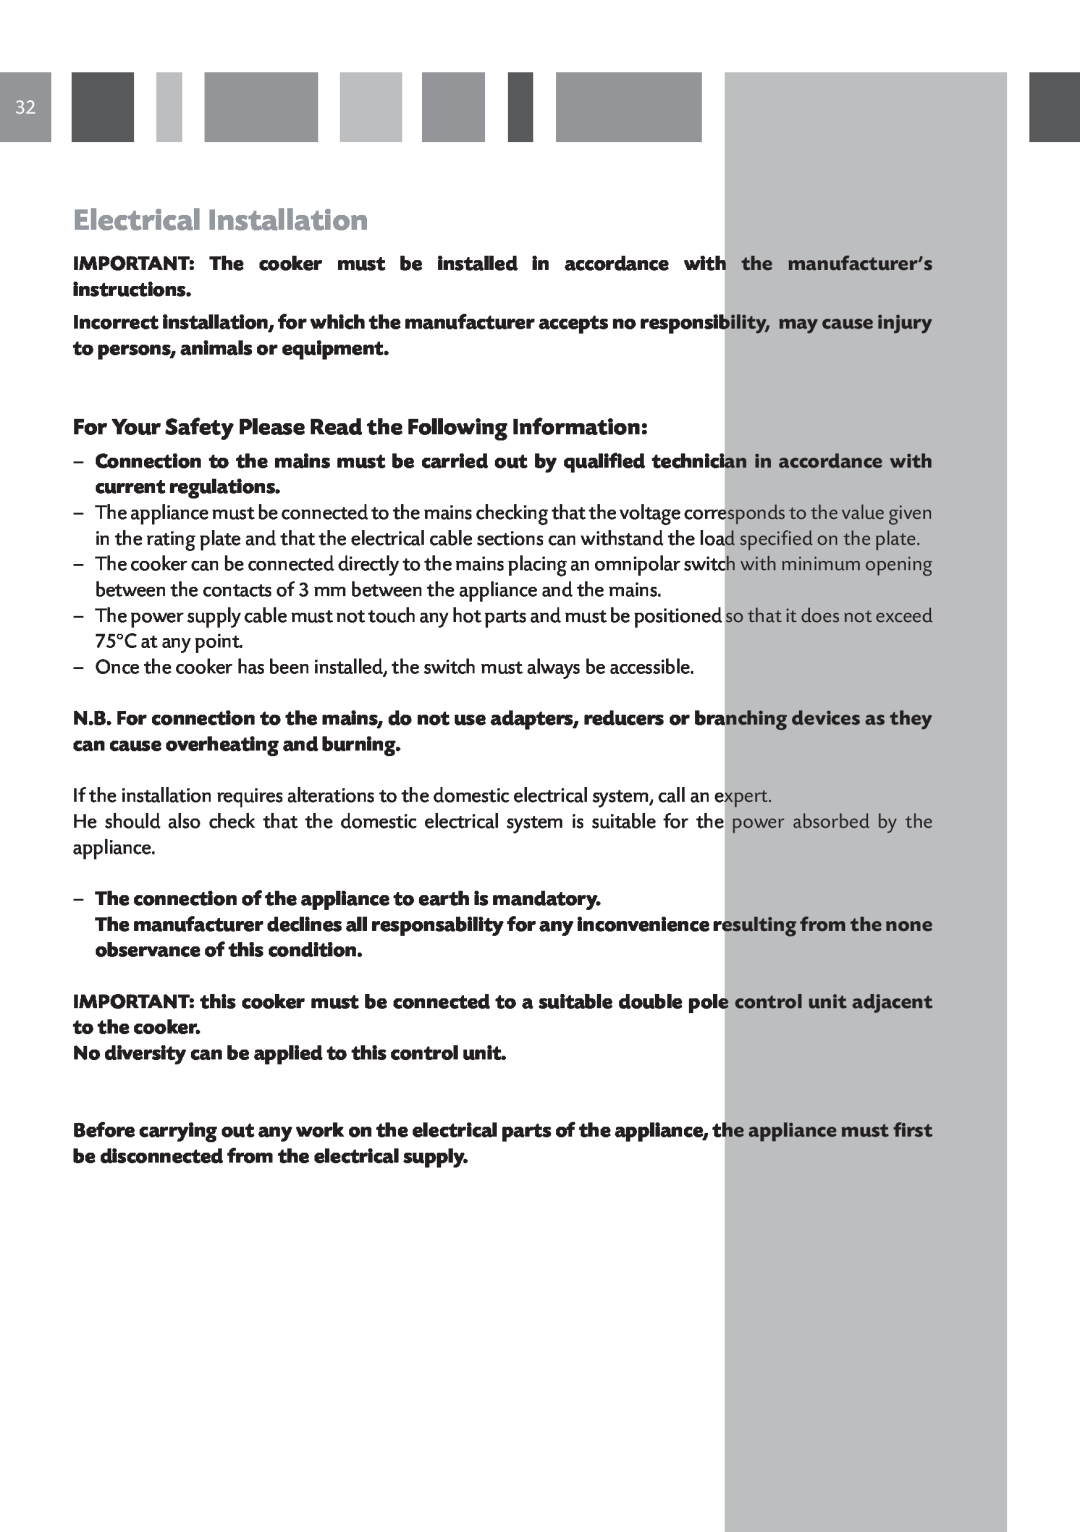 CDA RC 9620 manual Electrical Installation, For Your Safety Please Read the Following Information 